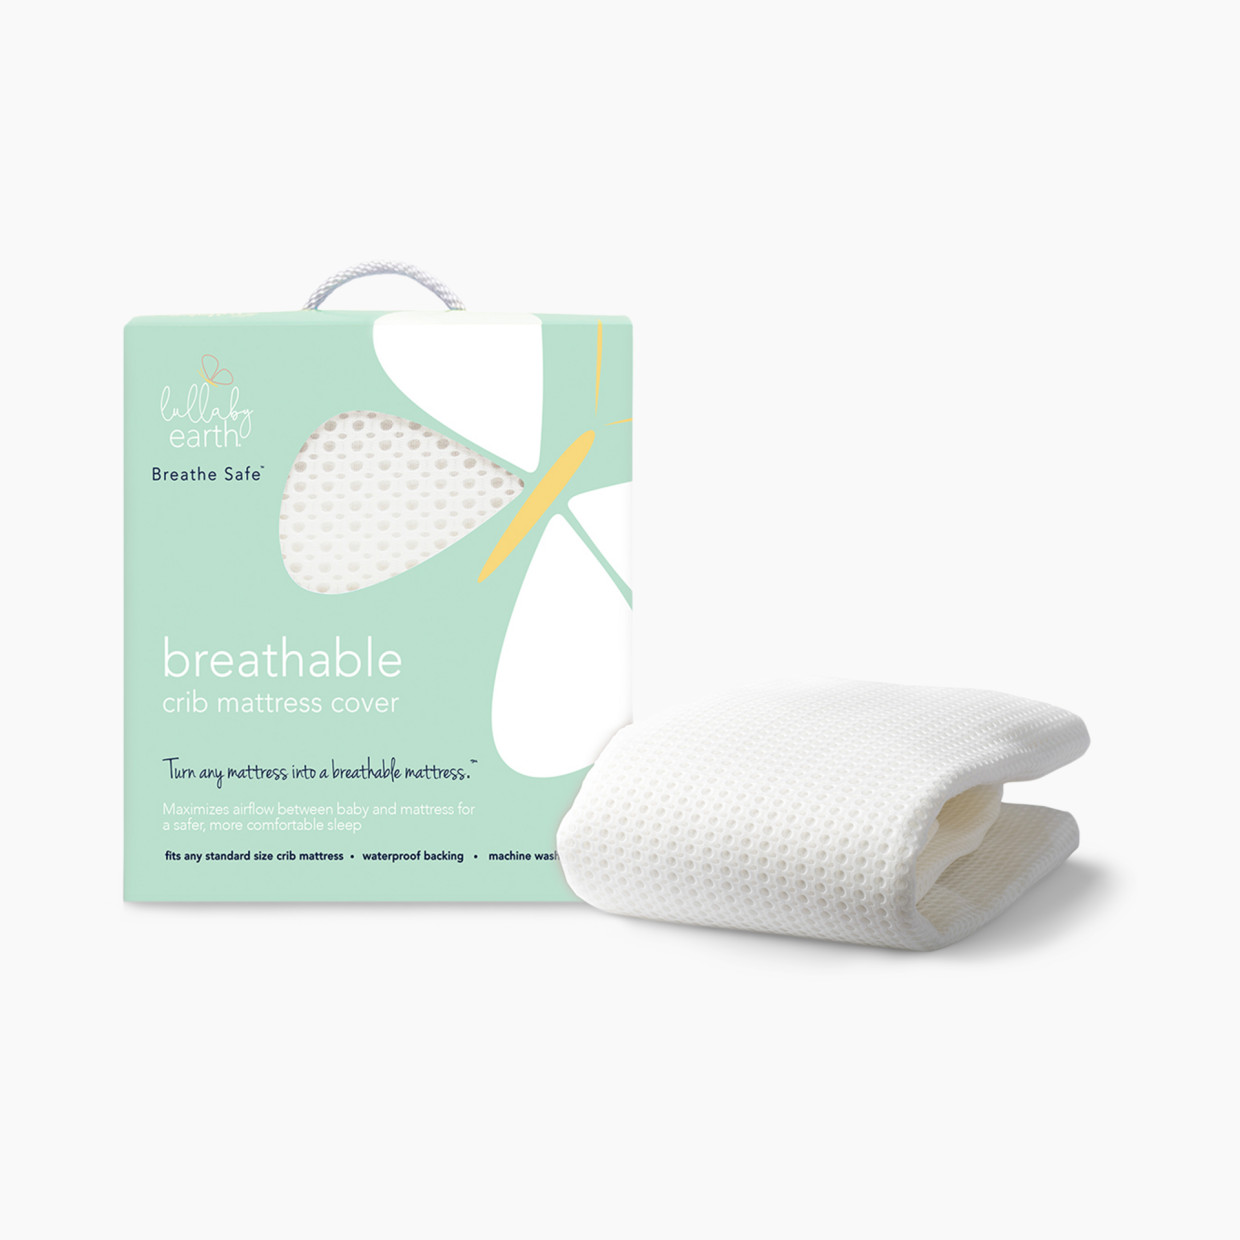 Lullaby Earth Breathe Safe Air Breathable Mattress Pad.